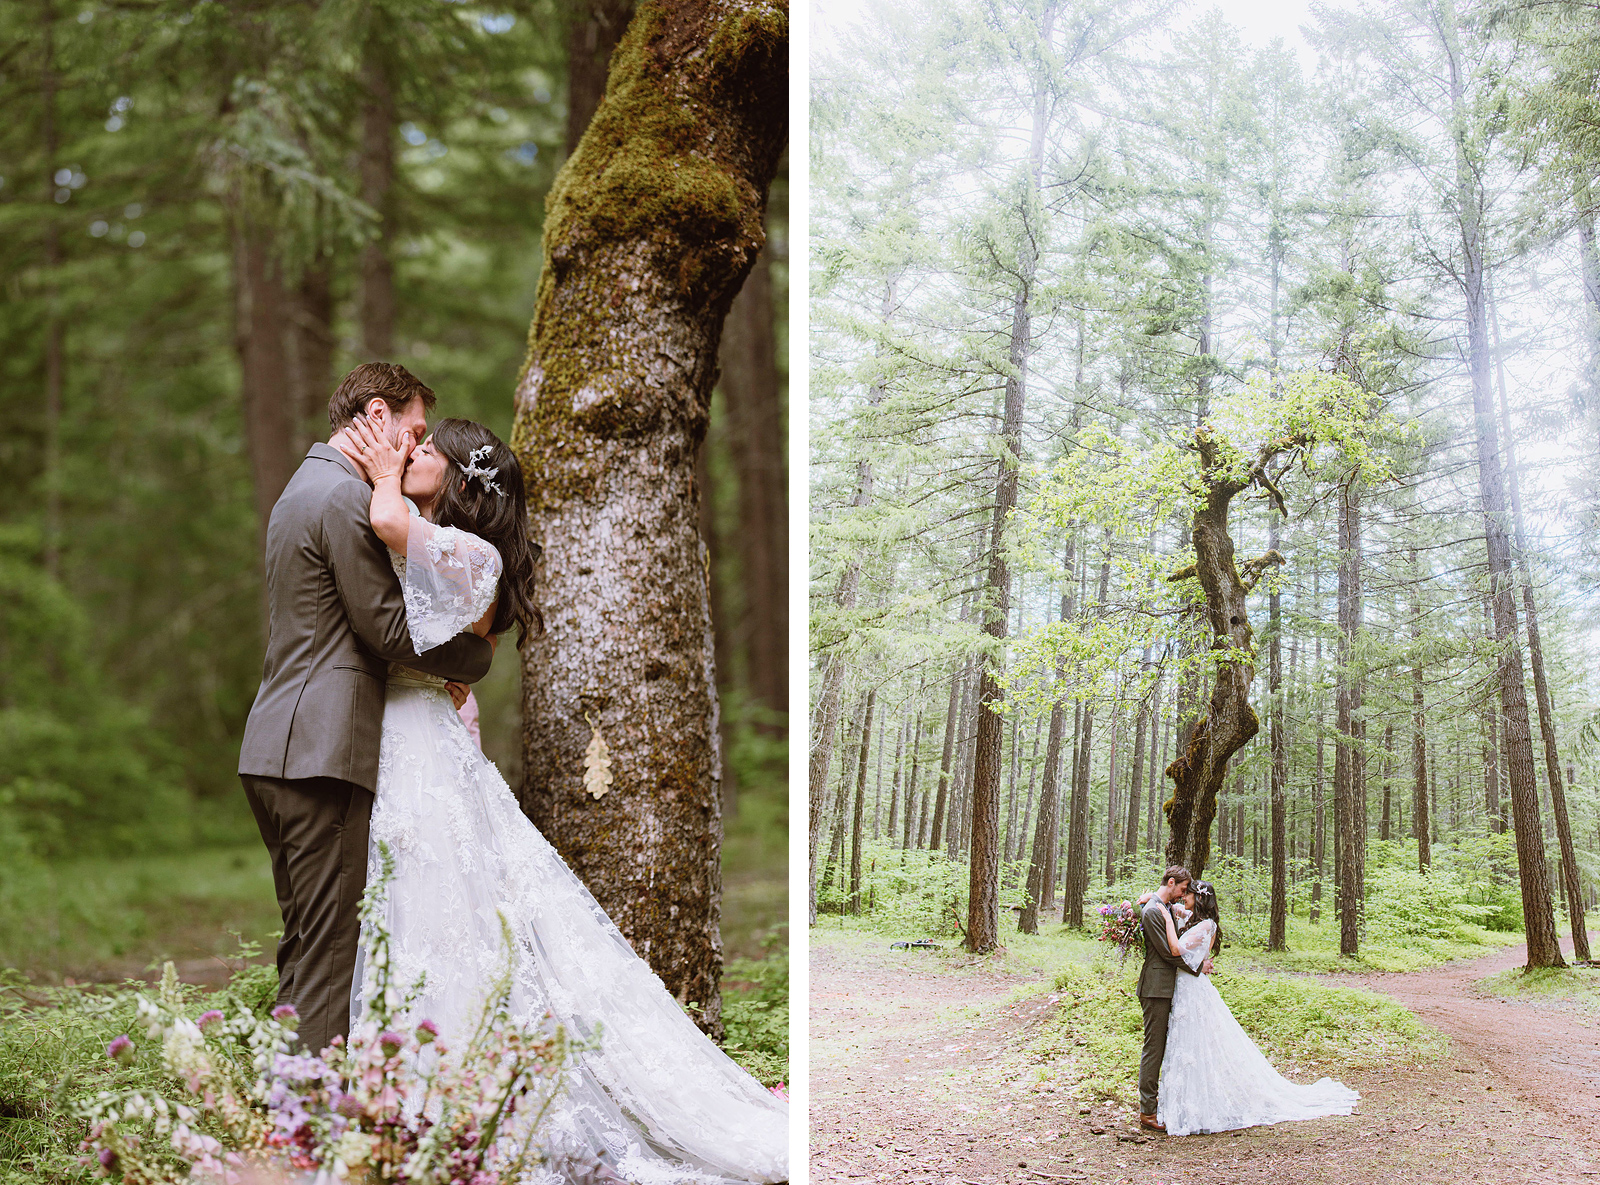 Bride and Groom kissing under a tree in the forest - Trout Lake Wedding, WA